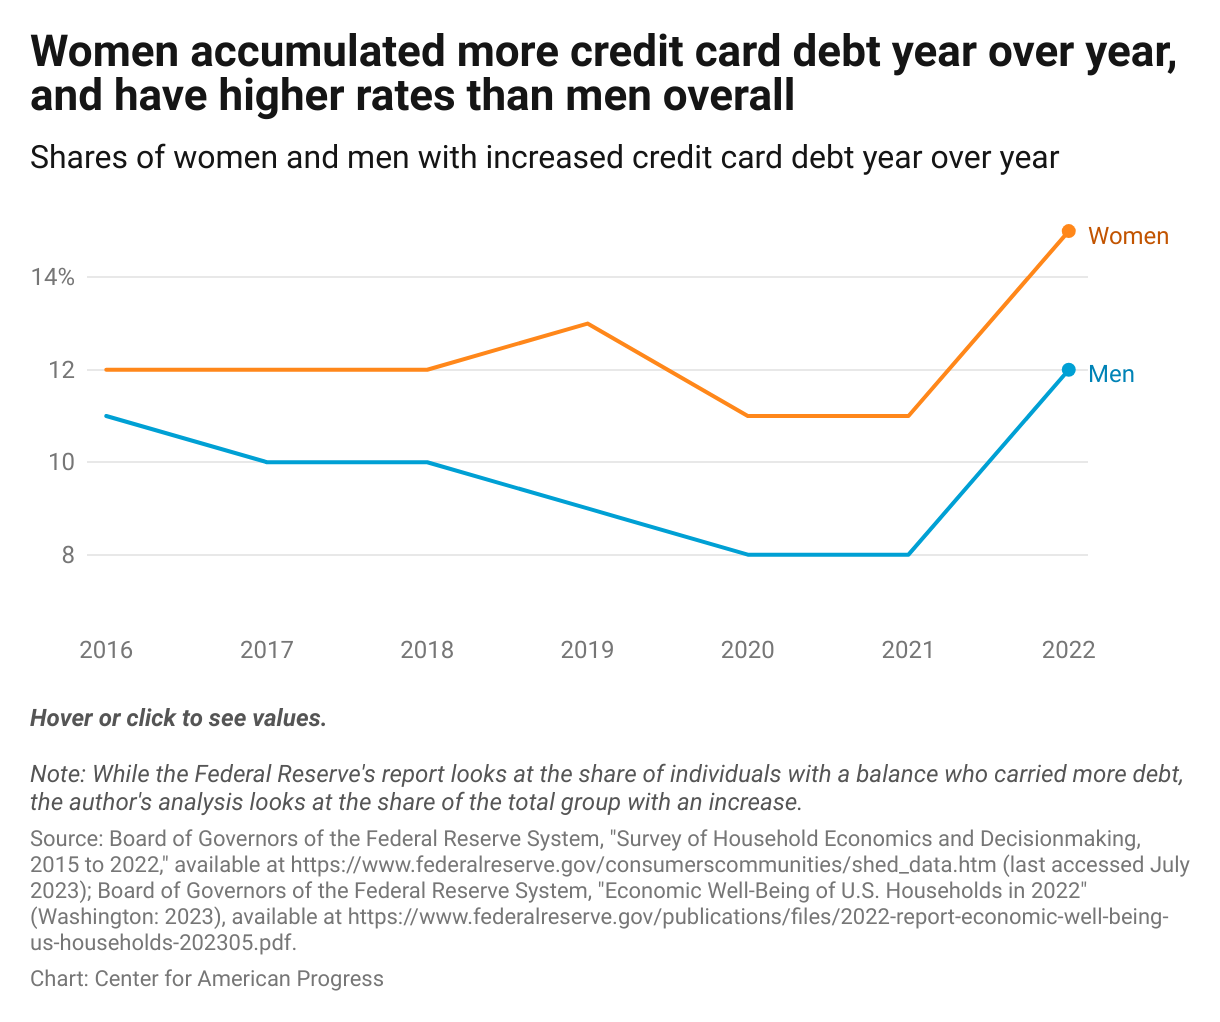 Line chart showing the shares of women and men who have more credit card debt compared to a year ago, with 15 percent of women and 12 percent of men reporting they held more in 2022.